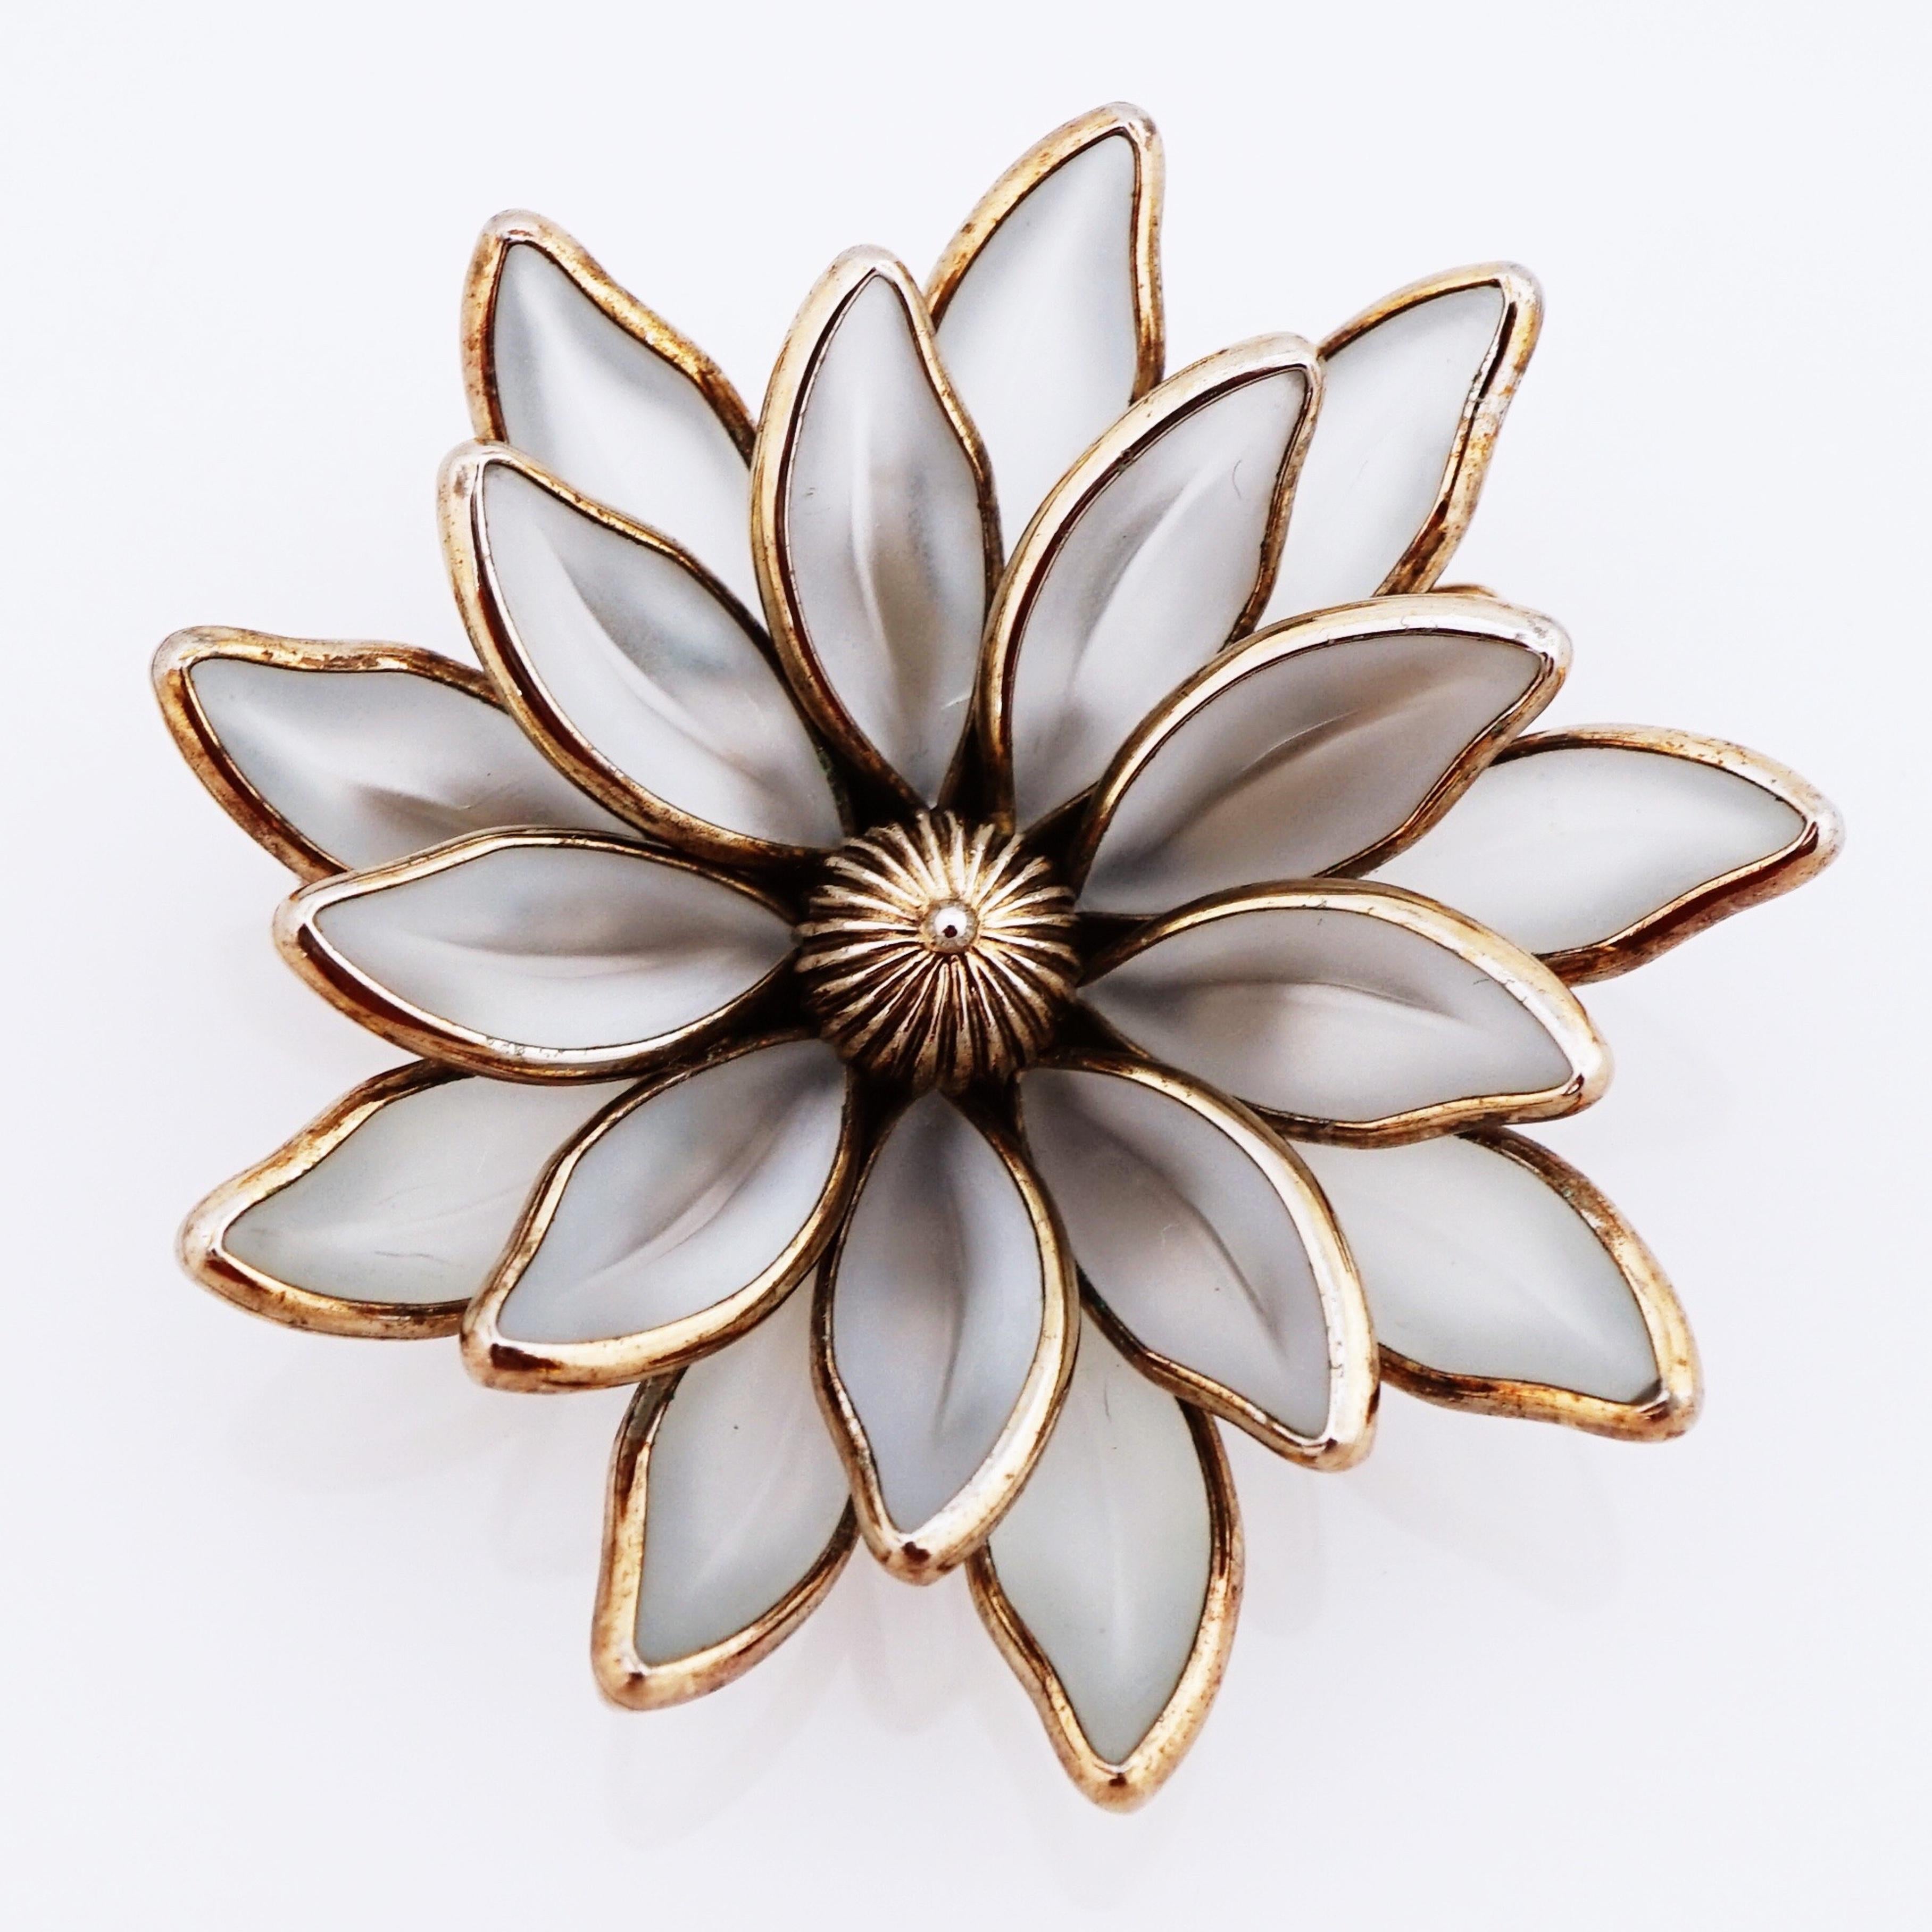 Modern Layered Frosted Glass Flower Figural Brooch By Crown Trifari, 1950s